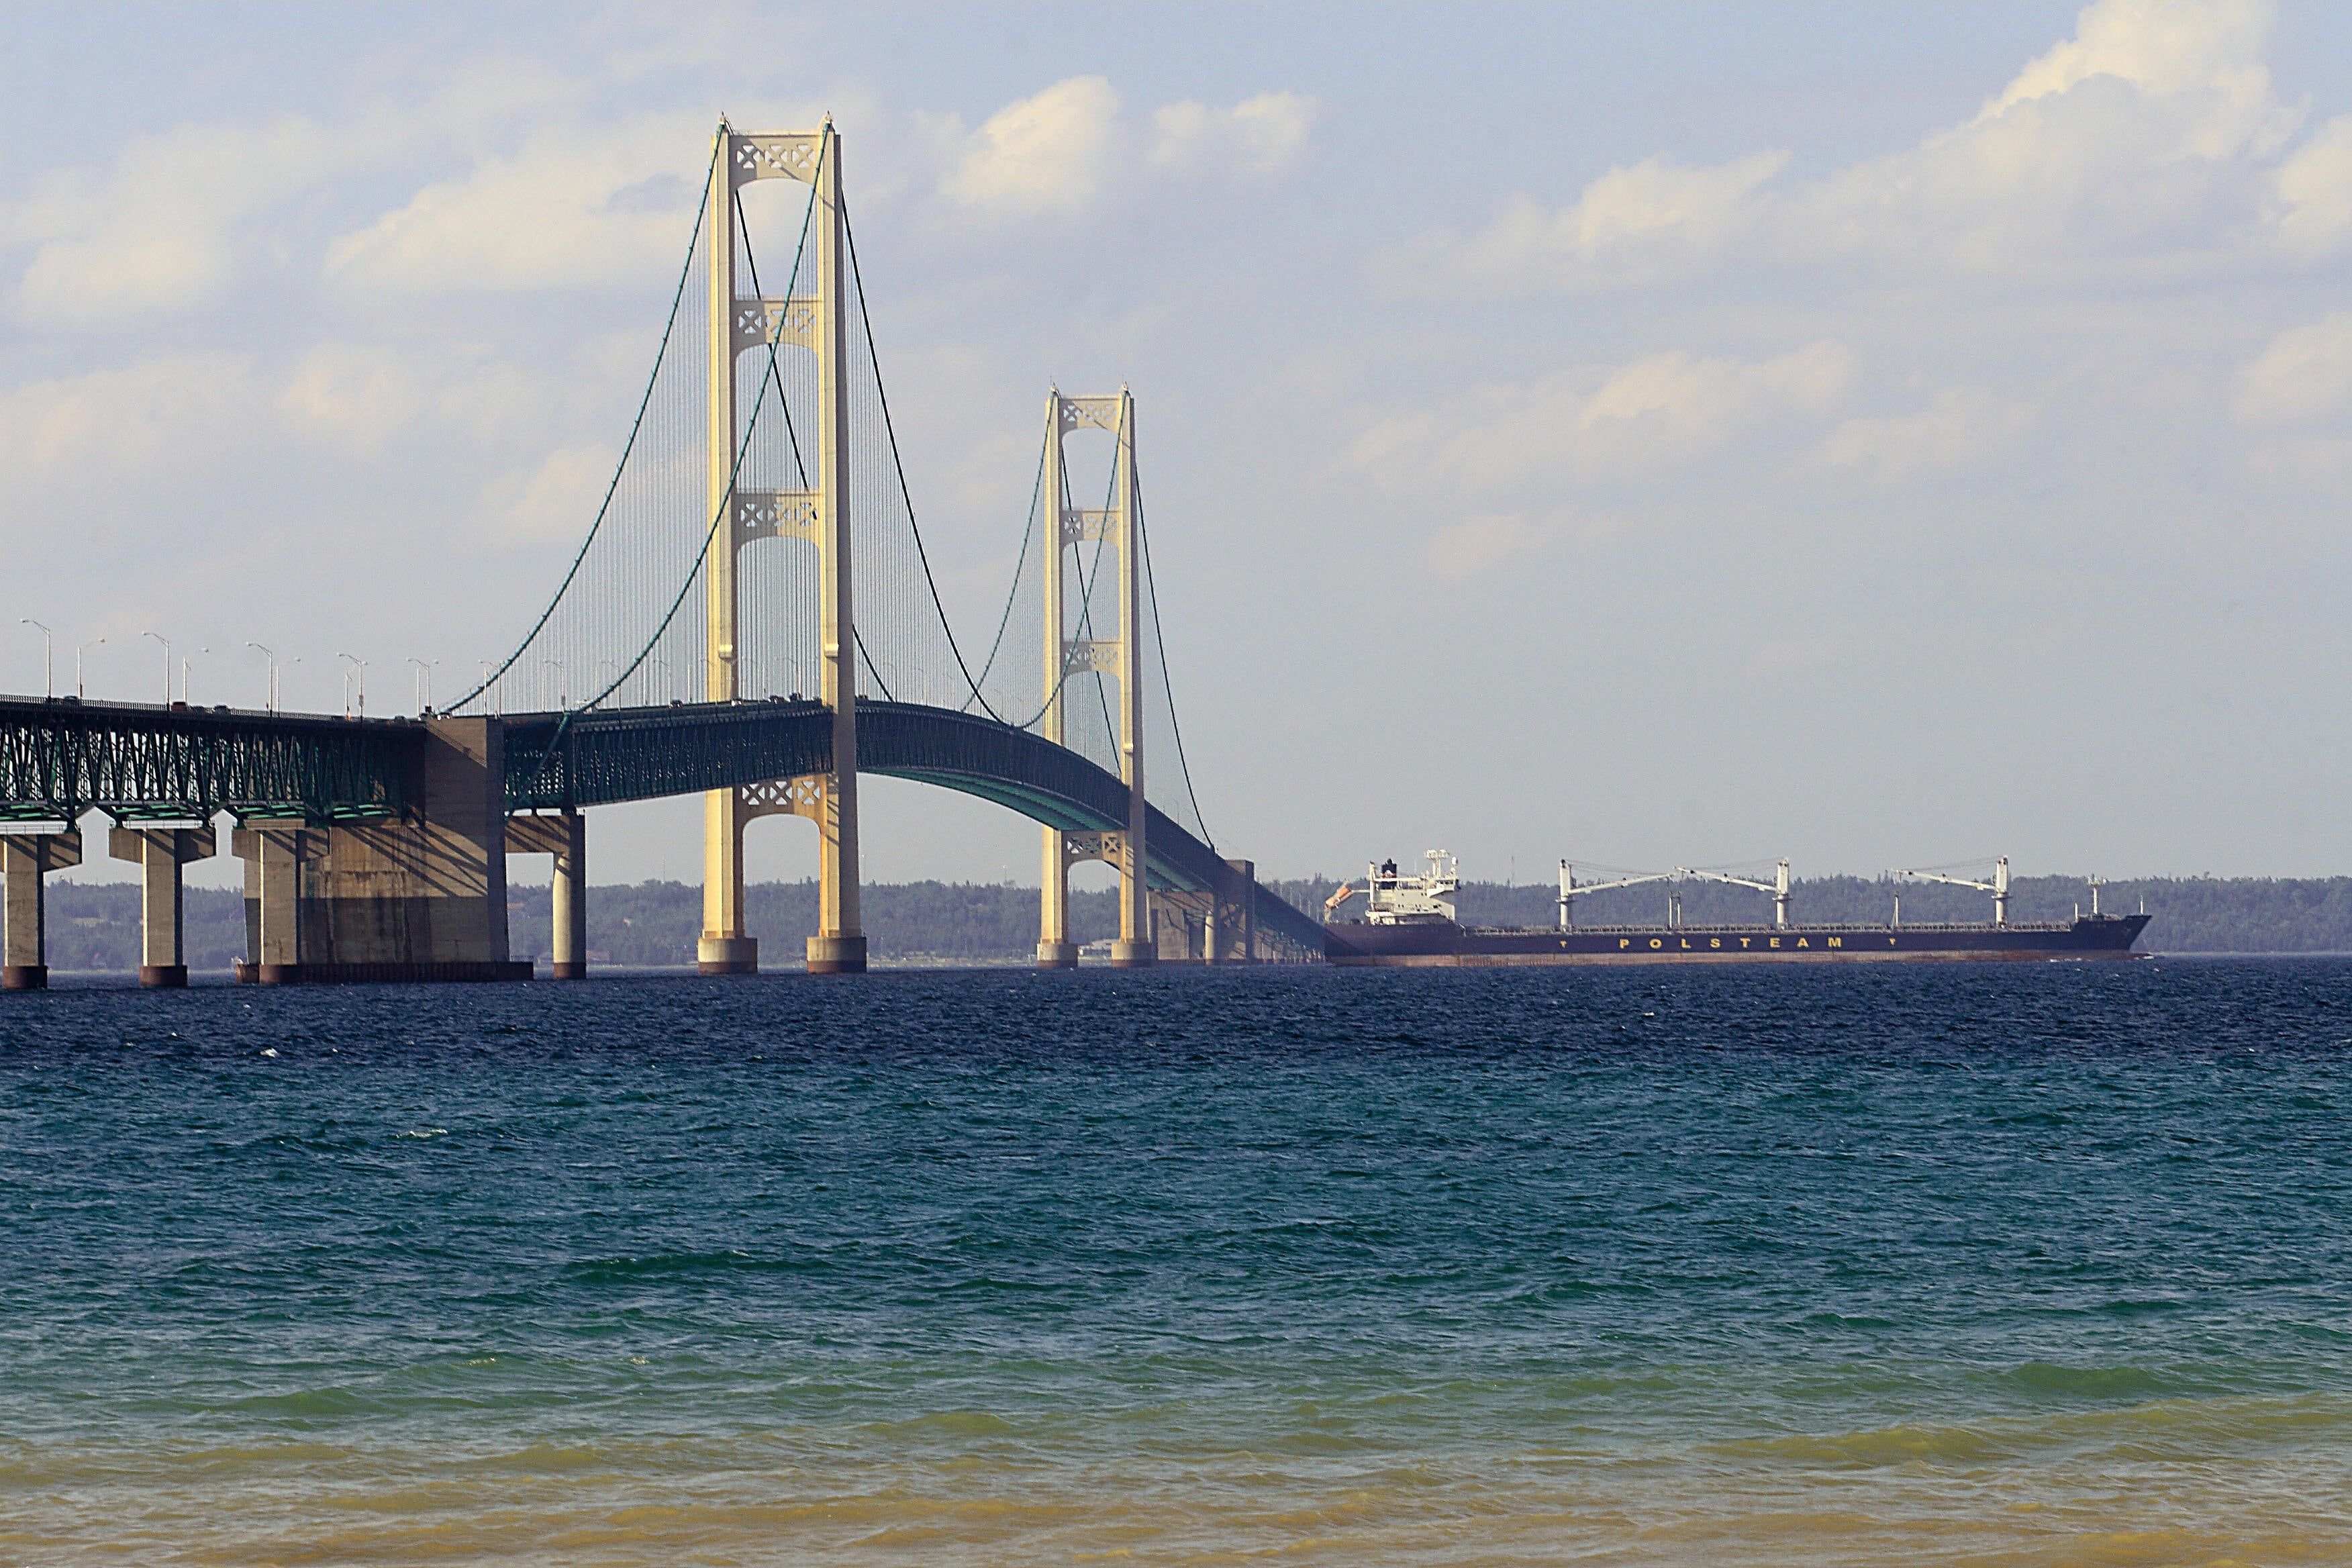 A ship is seen passing beneath the Mackinaw Bridge July 27, 2008 as seen from Mackinaw City, MI.The Mackinac Bridge straddles the Straits of Mackinac connecting Michigan's upper and lower peninsulas.